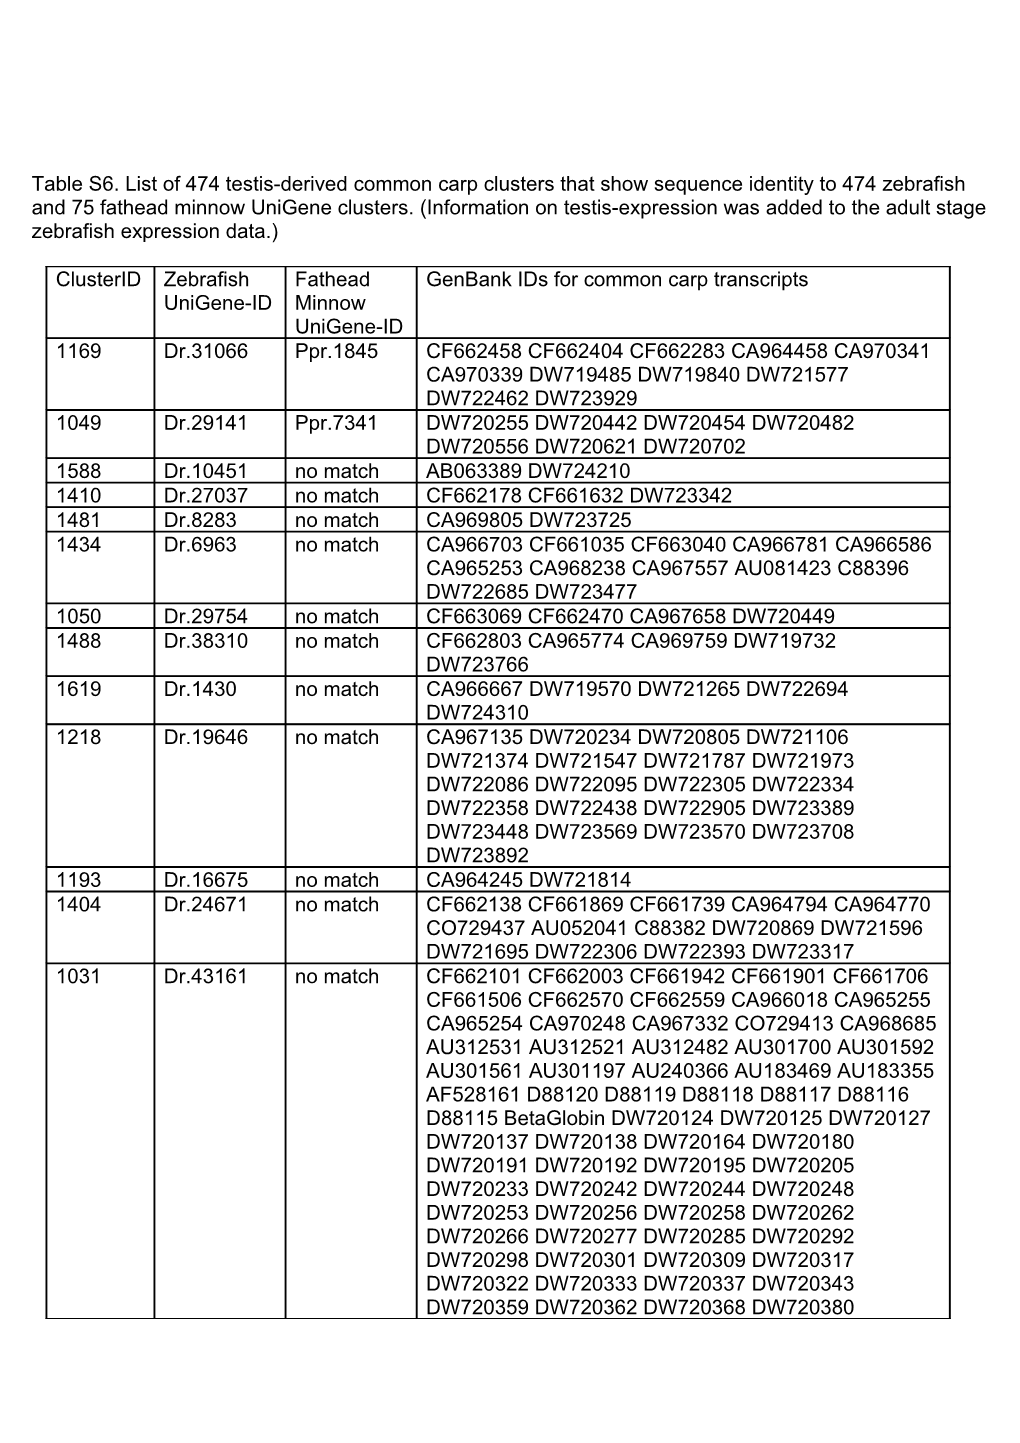 Table S6. List of 474 Testis-Derived Common Carp Clusters That Show Sequence Identity To